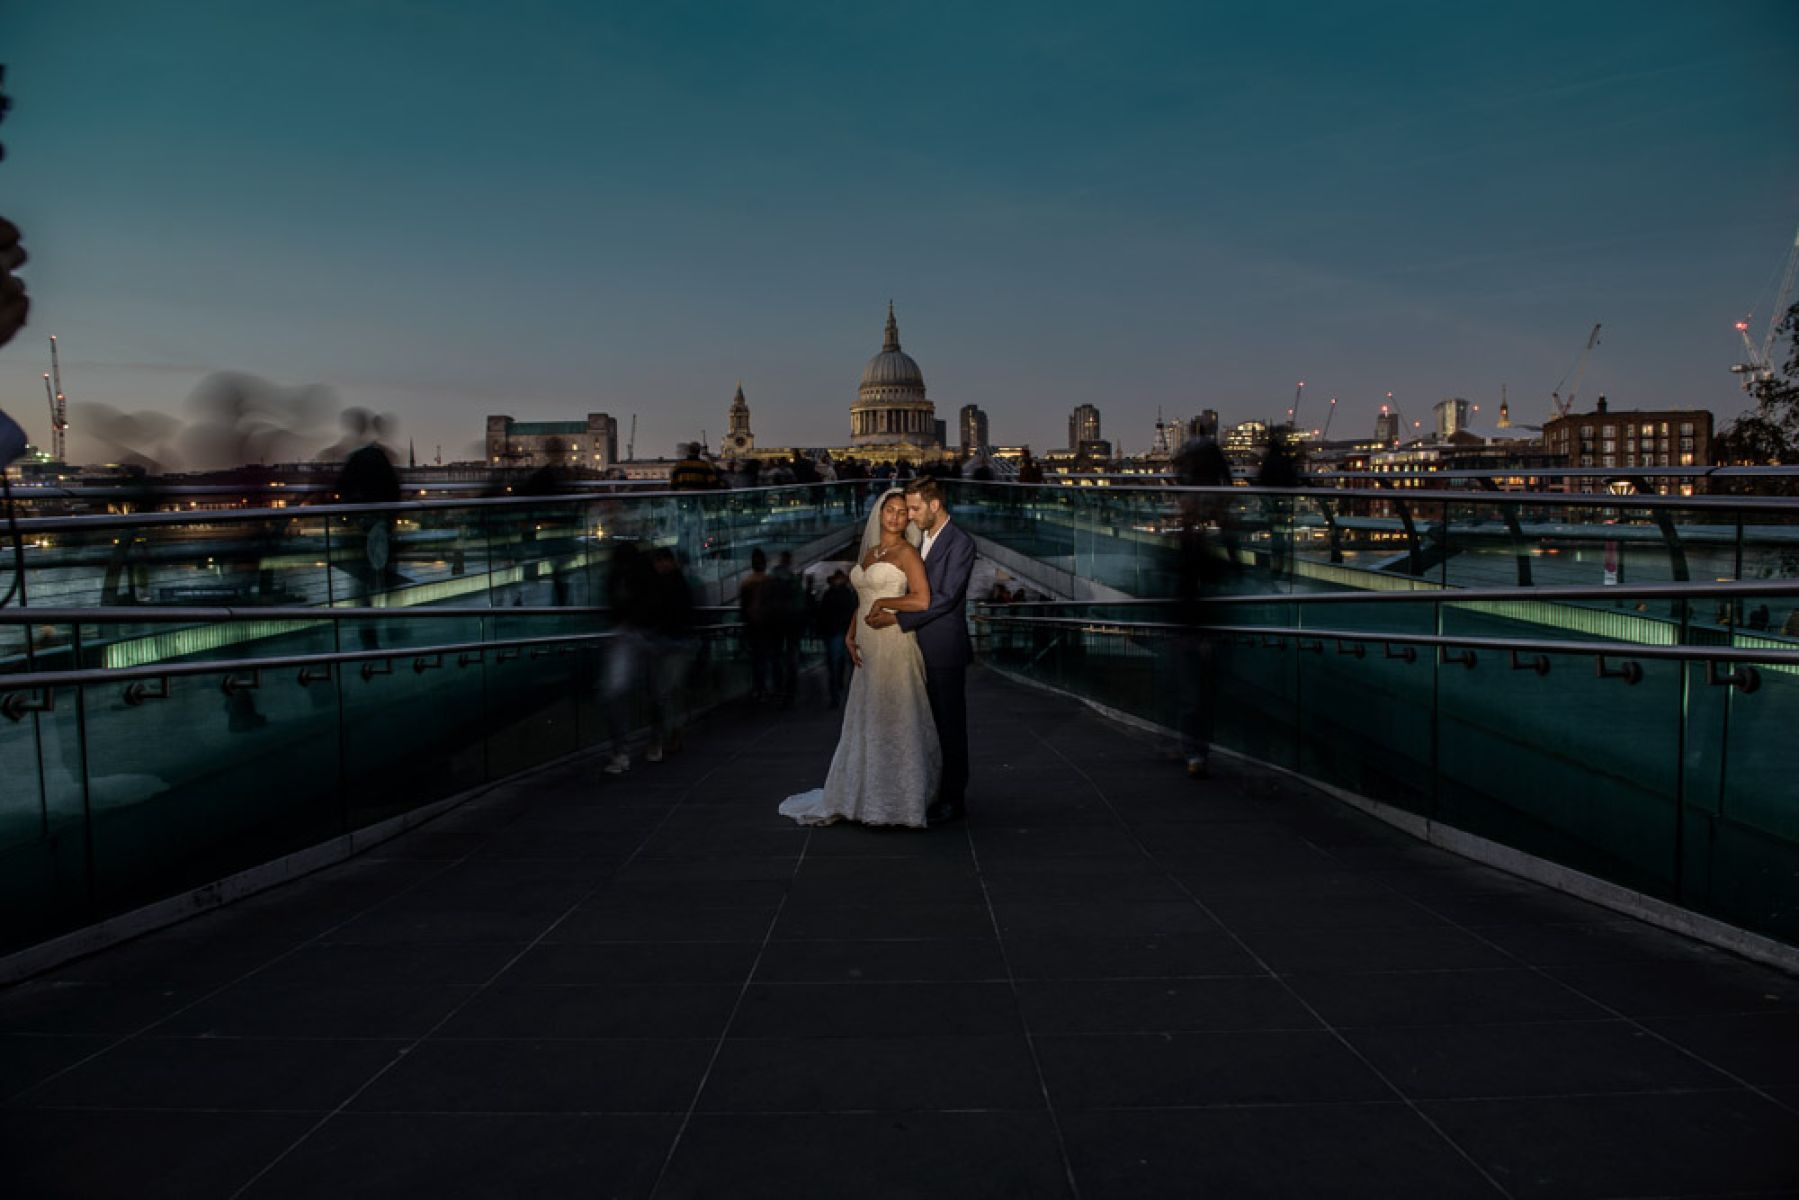 admin ajax.php?action=kernel&p=image&src=file%3Dwp content%252Fuploads%252F2022%252F09%252Fjordanphotography wedding in athens next day photoshoot in london 236